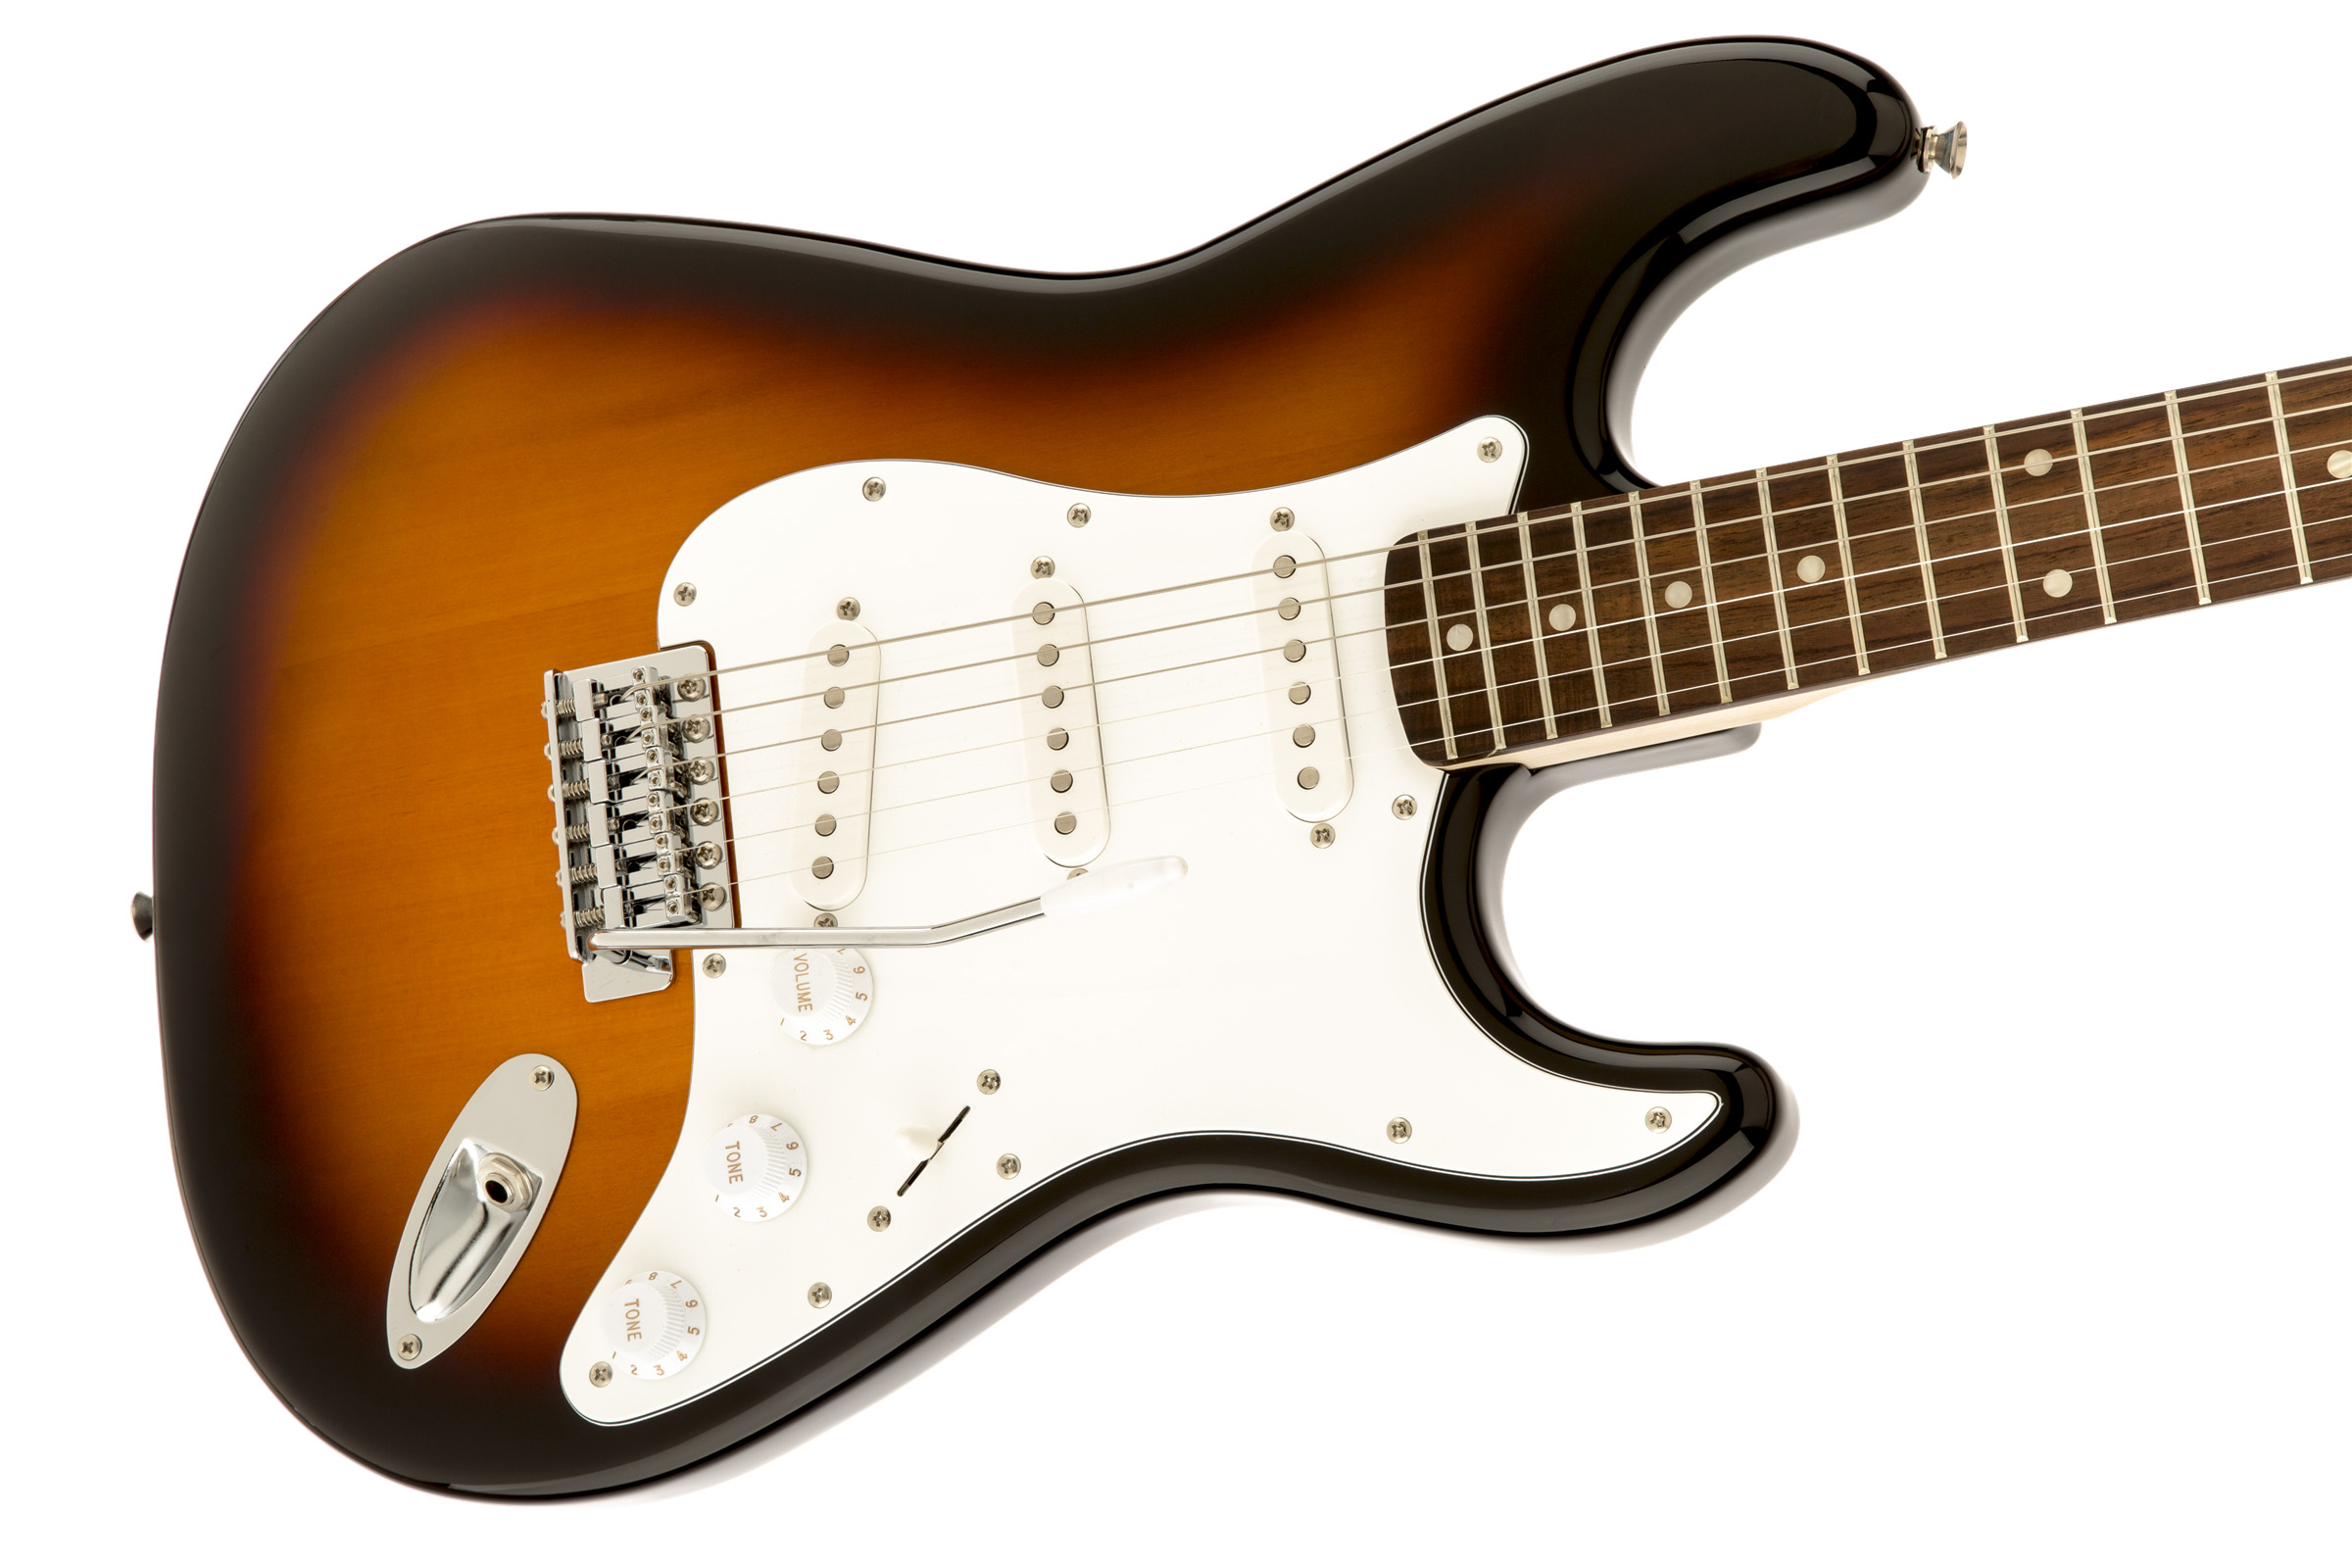 Bullet stratocaster hss. Электрогитара Fender American Original '50s Stratocaster. Электрогитара Fender Squier Bullet Stratocaster. Fender Player Strat HSS MN 3ts электрогитара, цвет санберст. Электрогитара Squier Affinity Stratocaster.